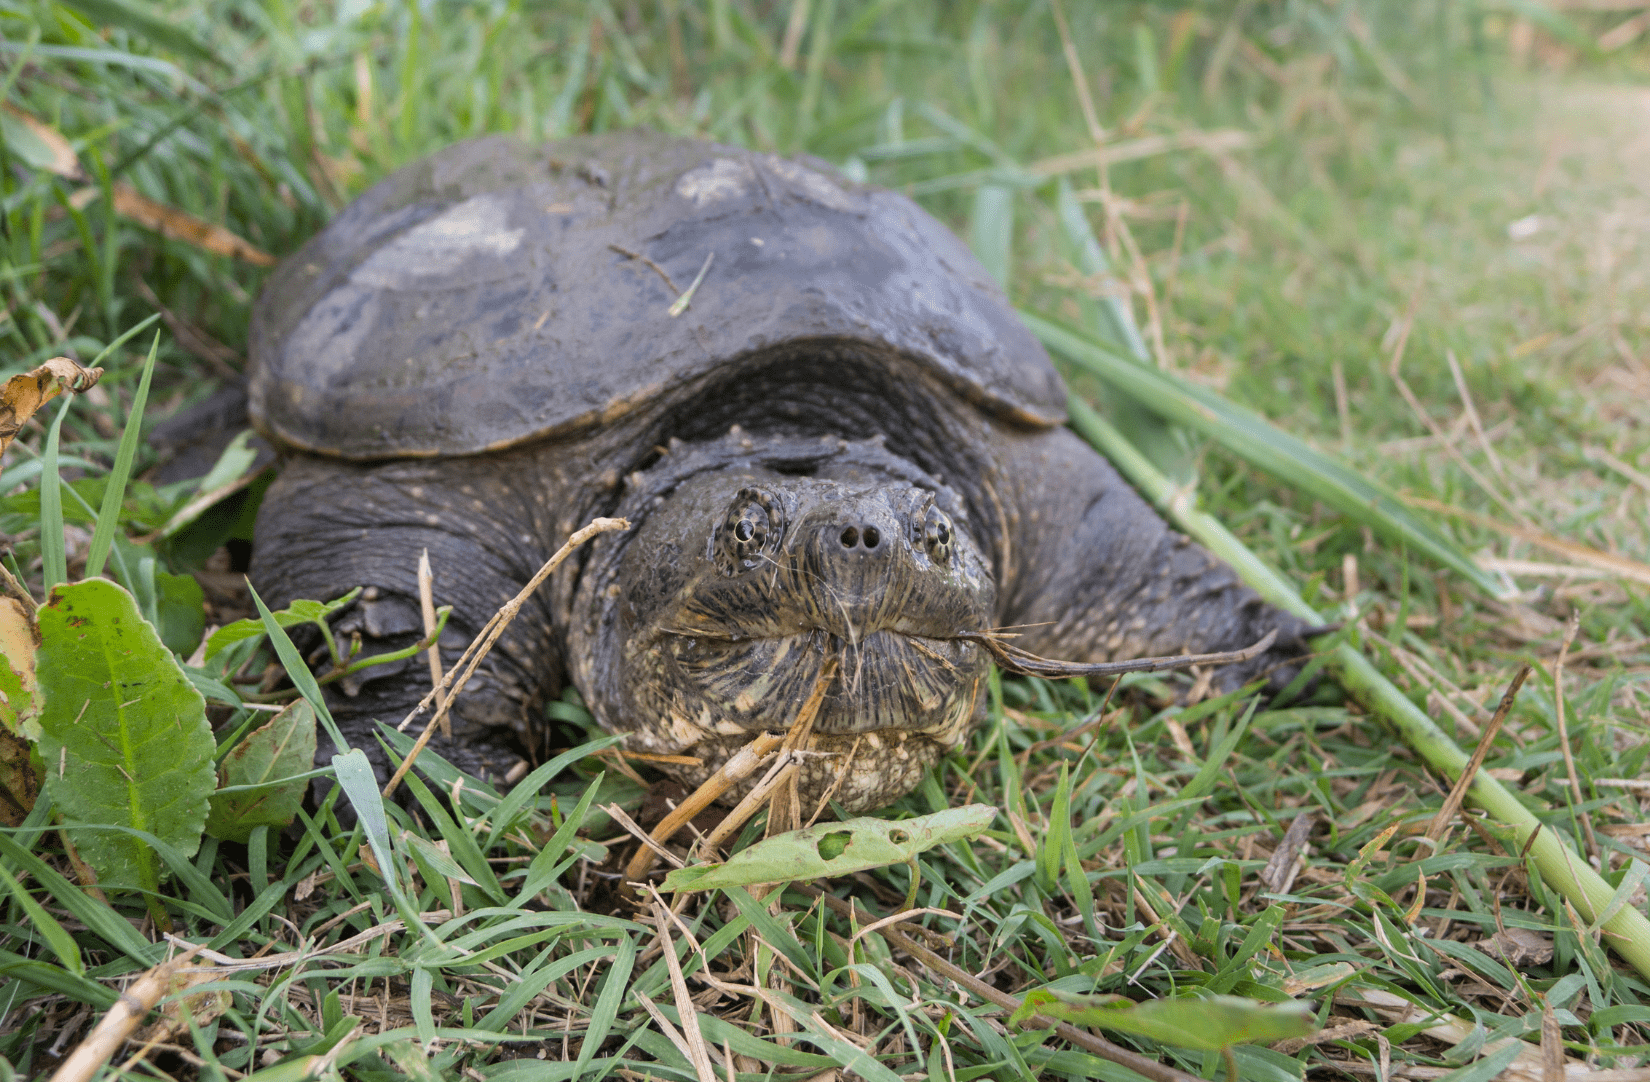 Invasive snapping turtle on grass